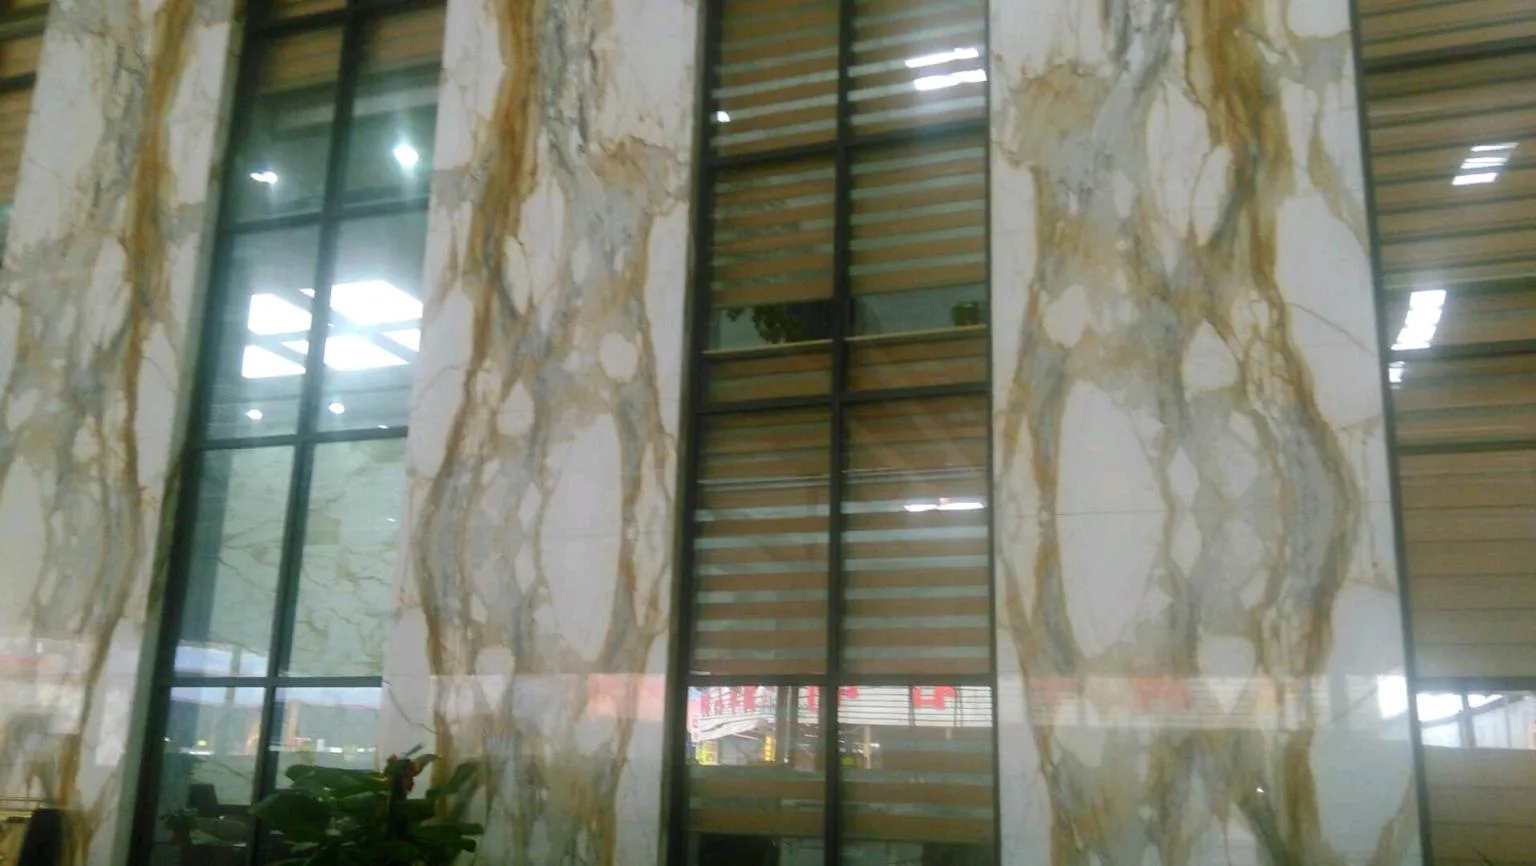 Hot Sale Popular Price Natural Stone Polished Calacatta Gold Marble Slab Italy